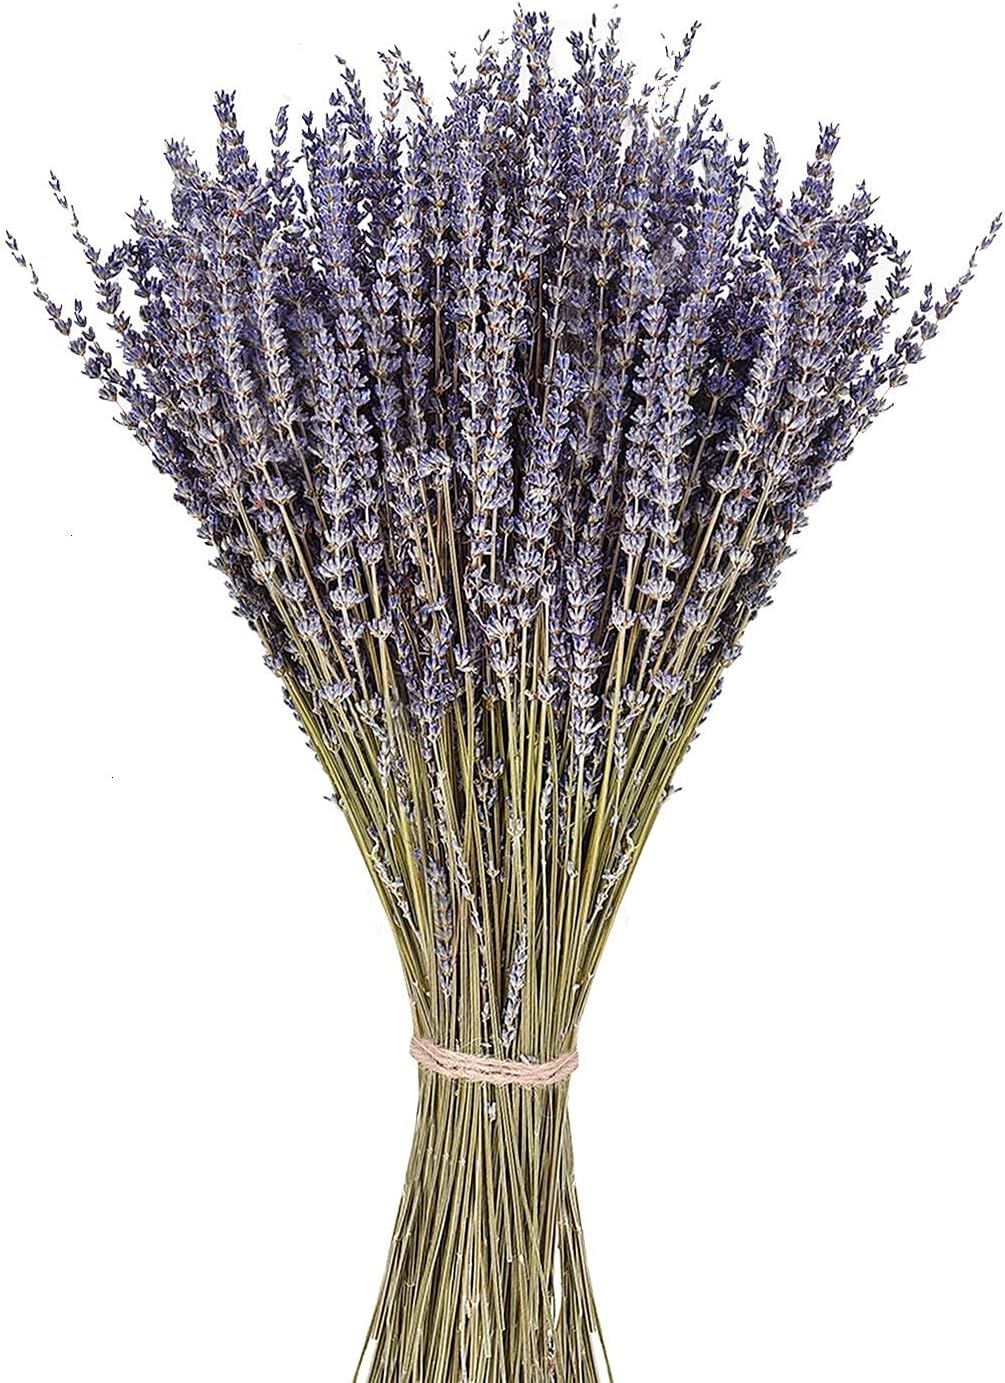 June Fox Dried Lavender Flowers 270-300 Stems 100% Natural Dried Lavender Bunches for Home Deco... | Amazon (US)